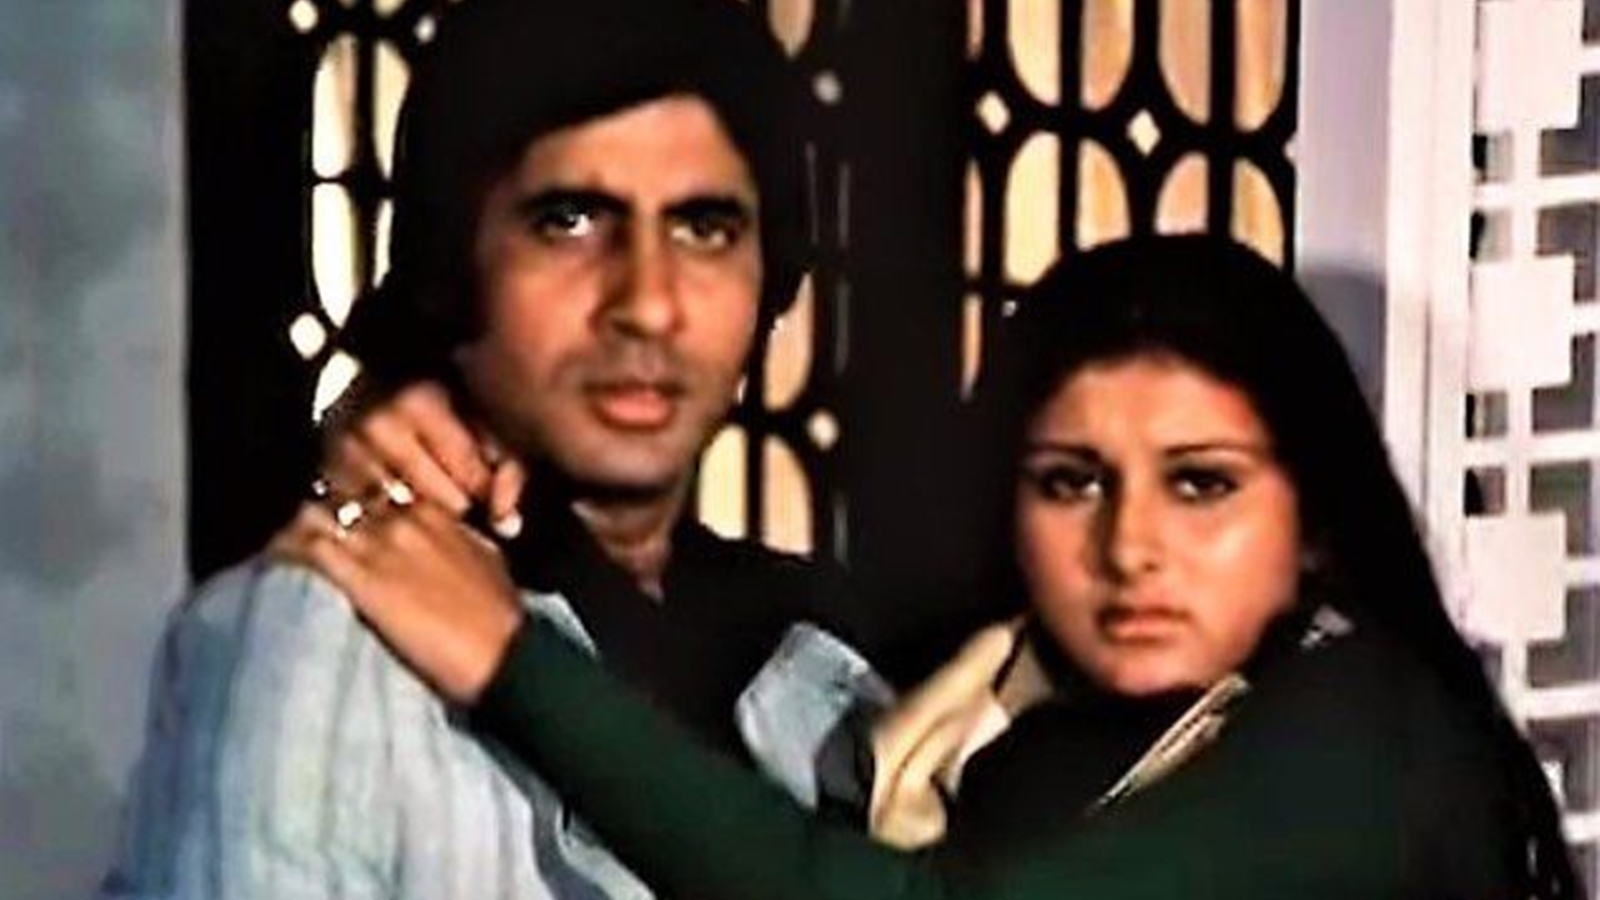 Poonam Dhillon Ki Sexy Video - Poonam Dhillon recalls how Amitabh Bachchan treated her 'like a prop' on  her first day of shoot: 'I was so scared, nervous' | Bollywood News - The  Indian Express